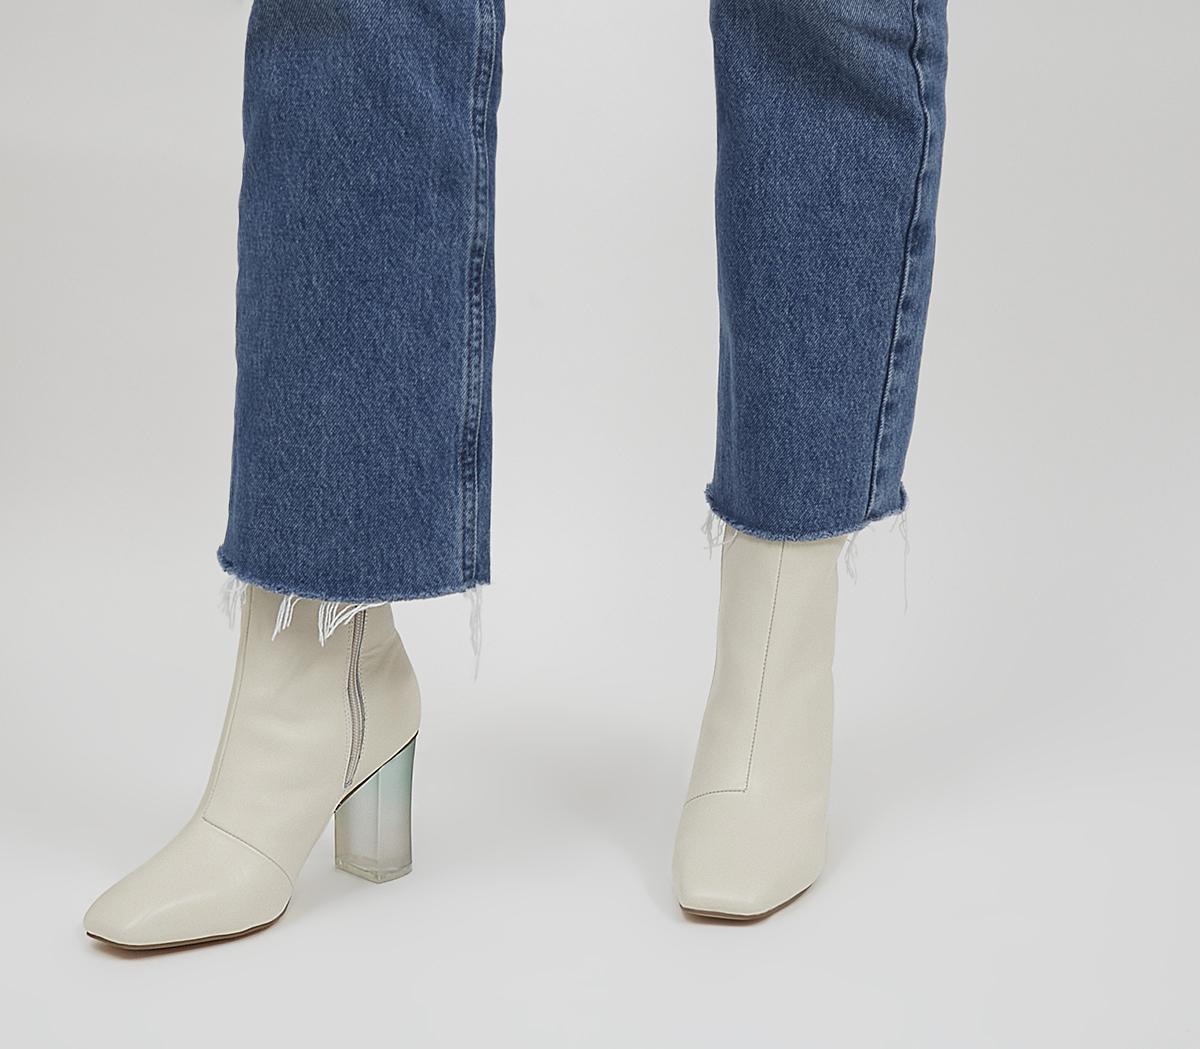 OfficeAround Feature Block Heeled Ankle BootsOff White Leather